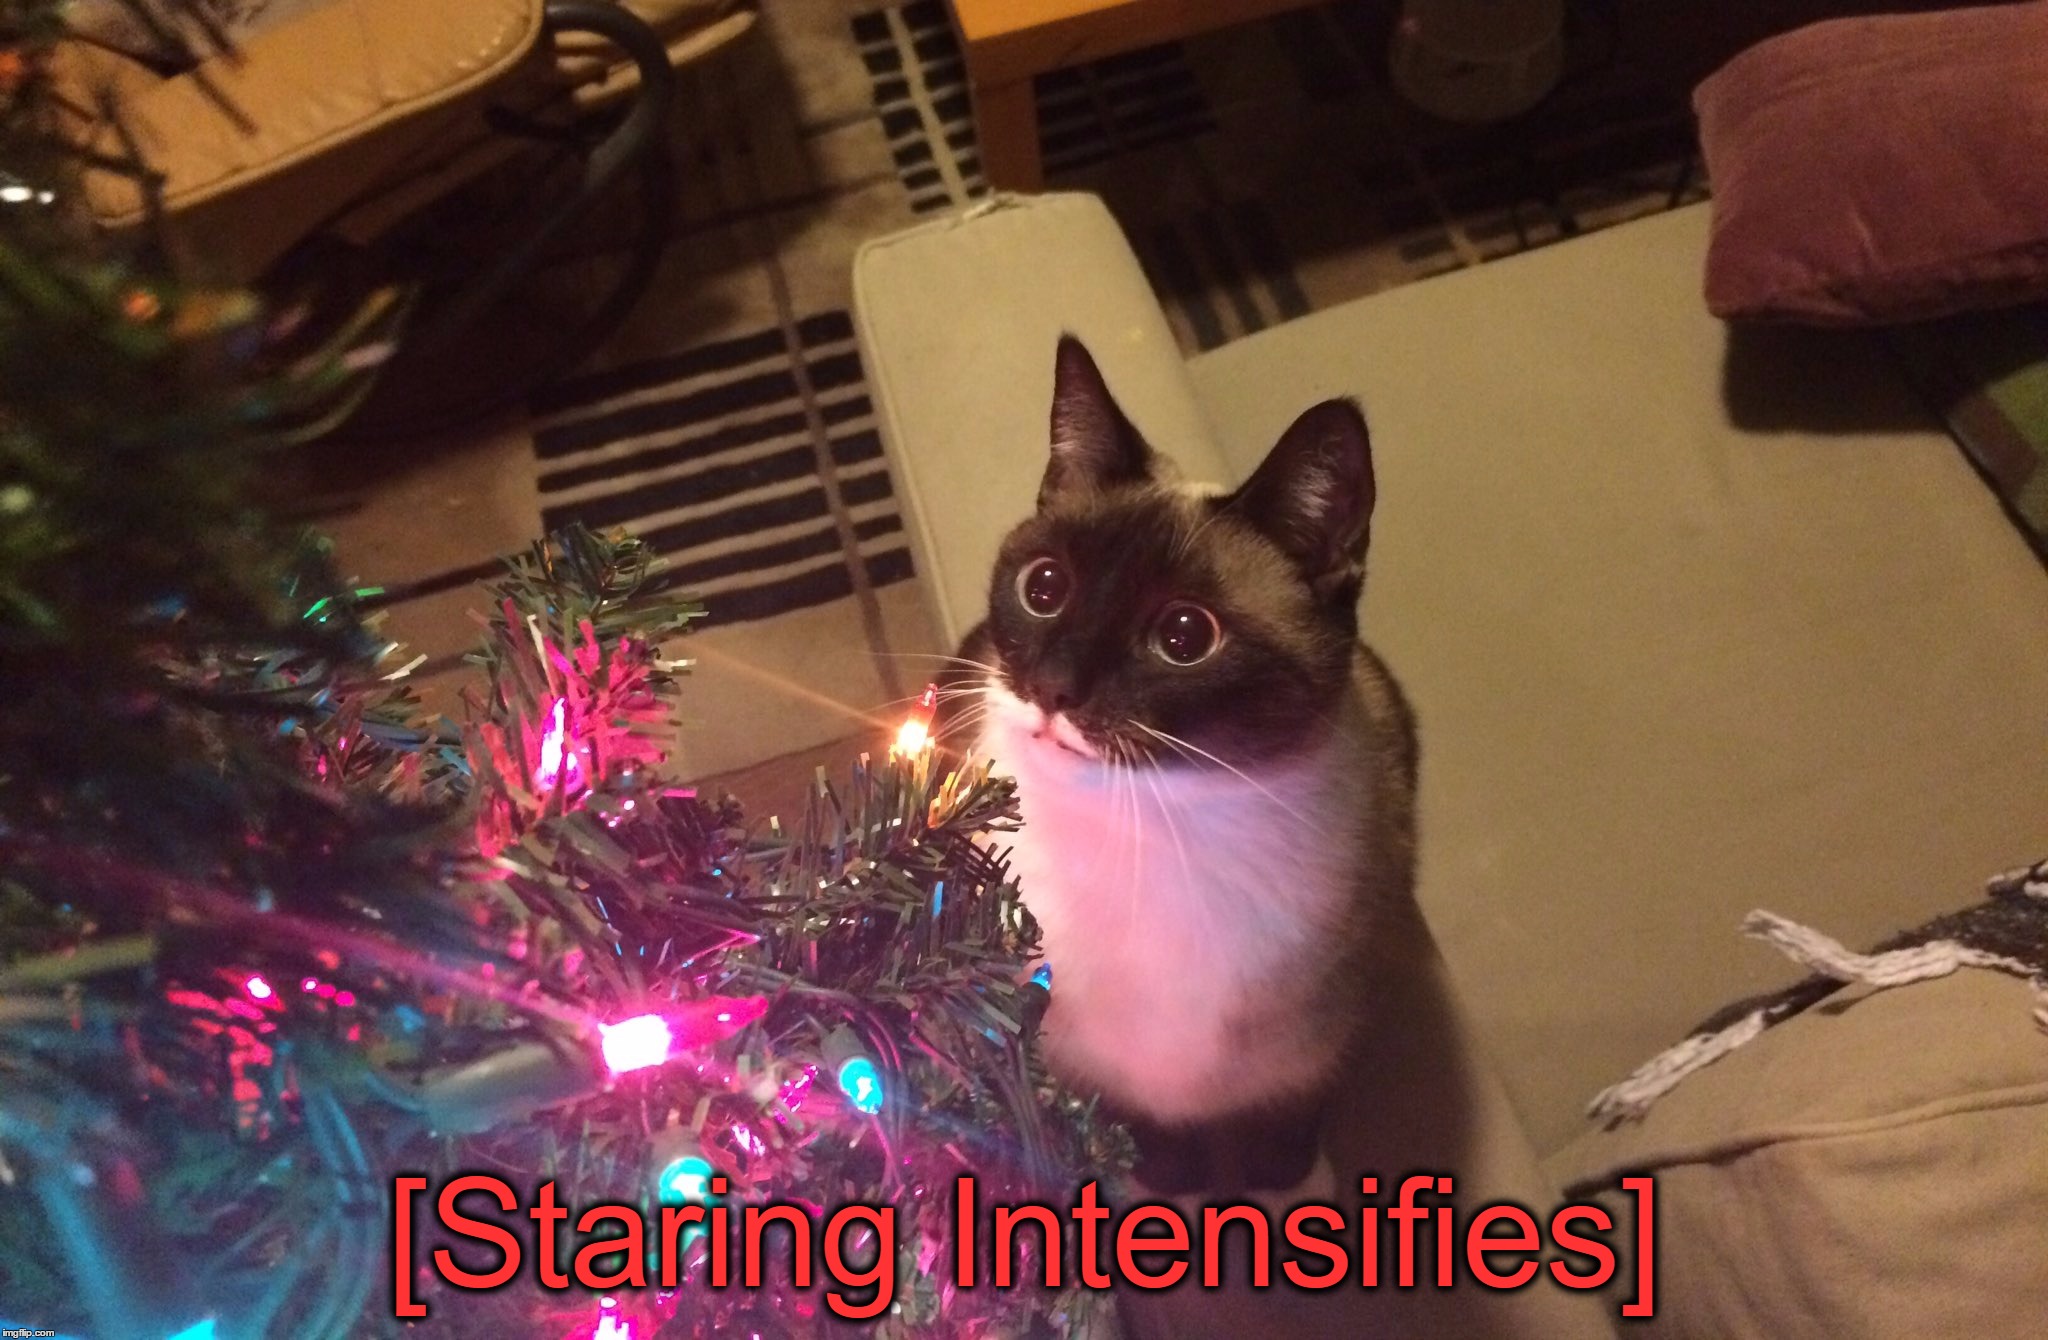 The Wonder Of A Christmas Tree, 12 Days Left Until Christmas... | [Staring Intensifies] | image tagged in memes,christmas,christmas tree,funny,cats,staring intensifies | made w/ Imgflip meme maker